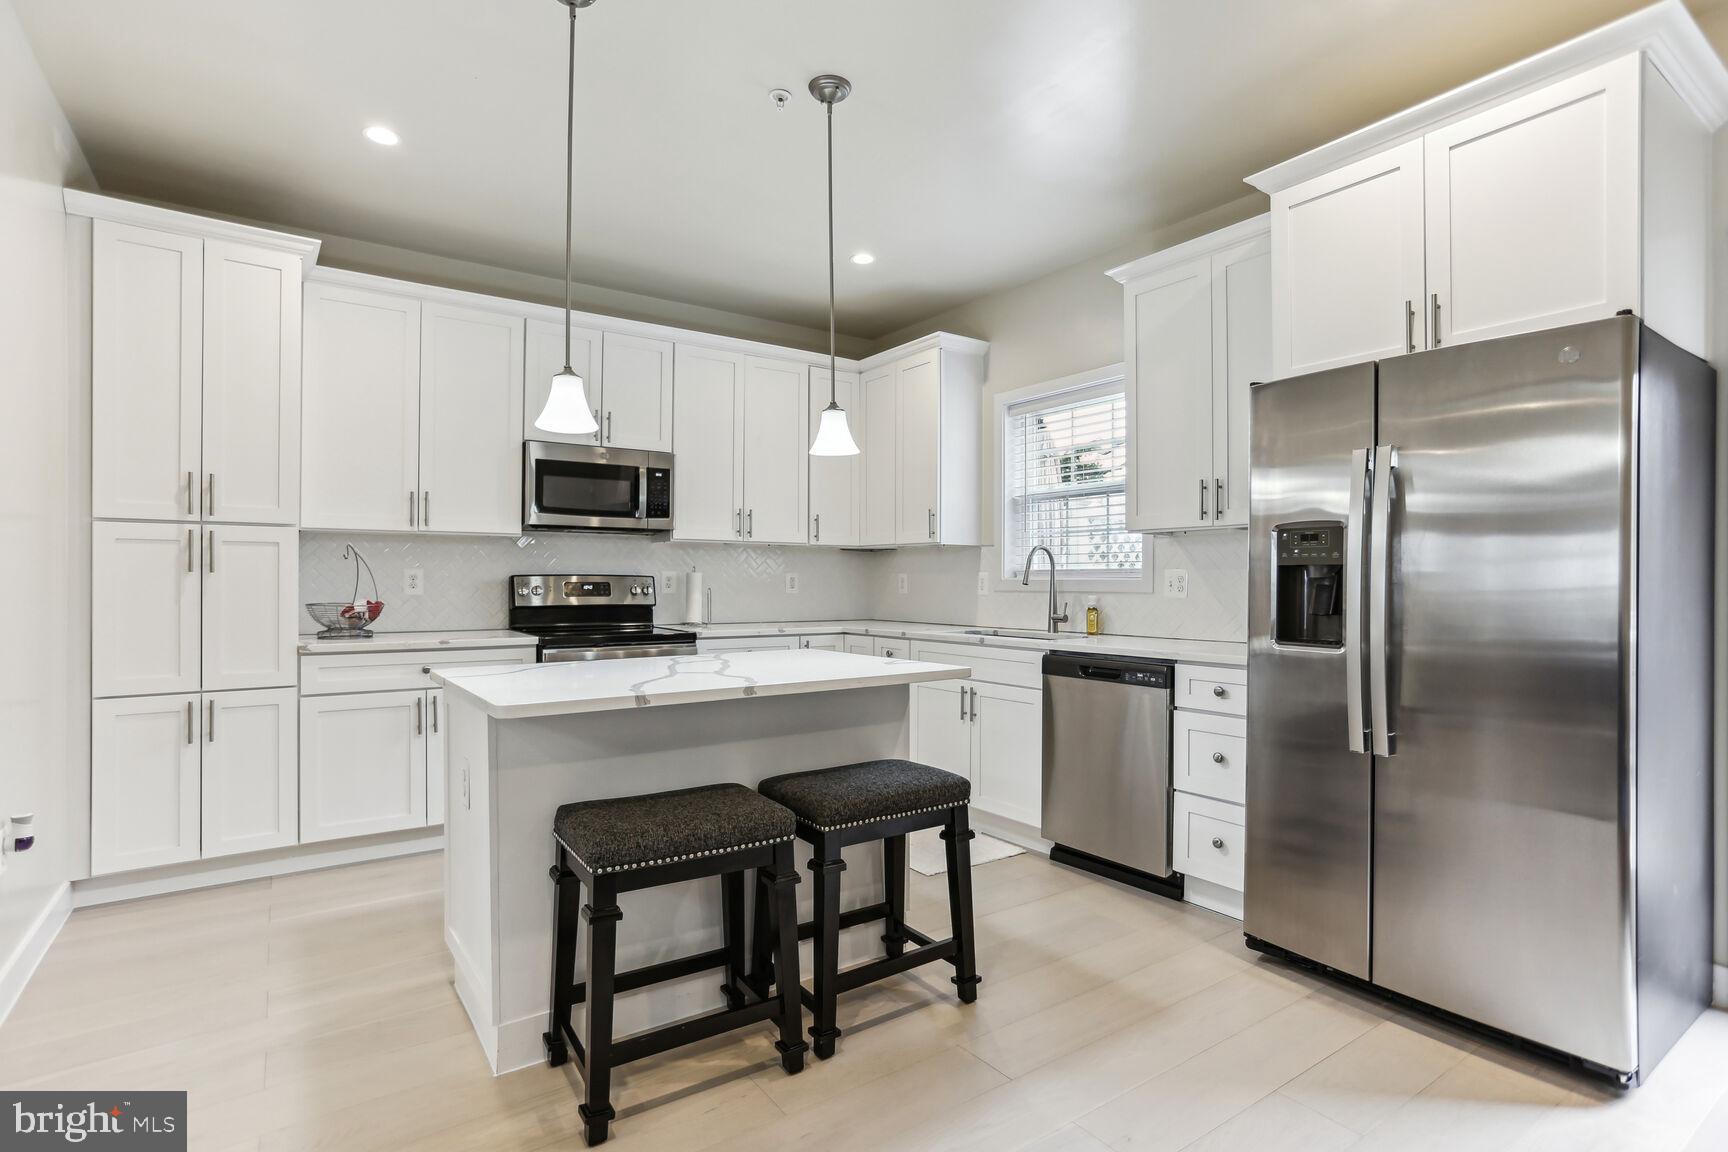 a kitchen with cabinets stainless steel appliances and a center island